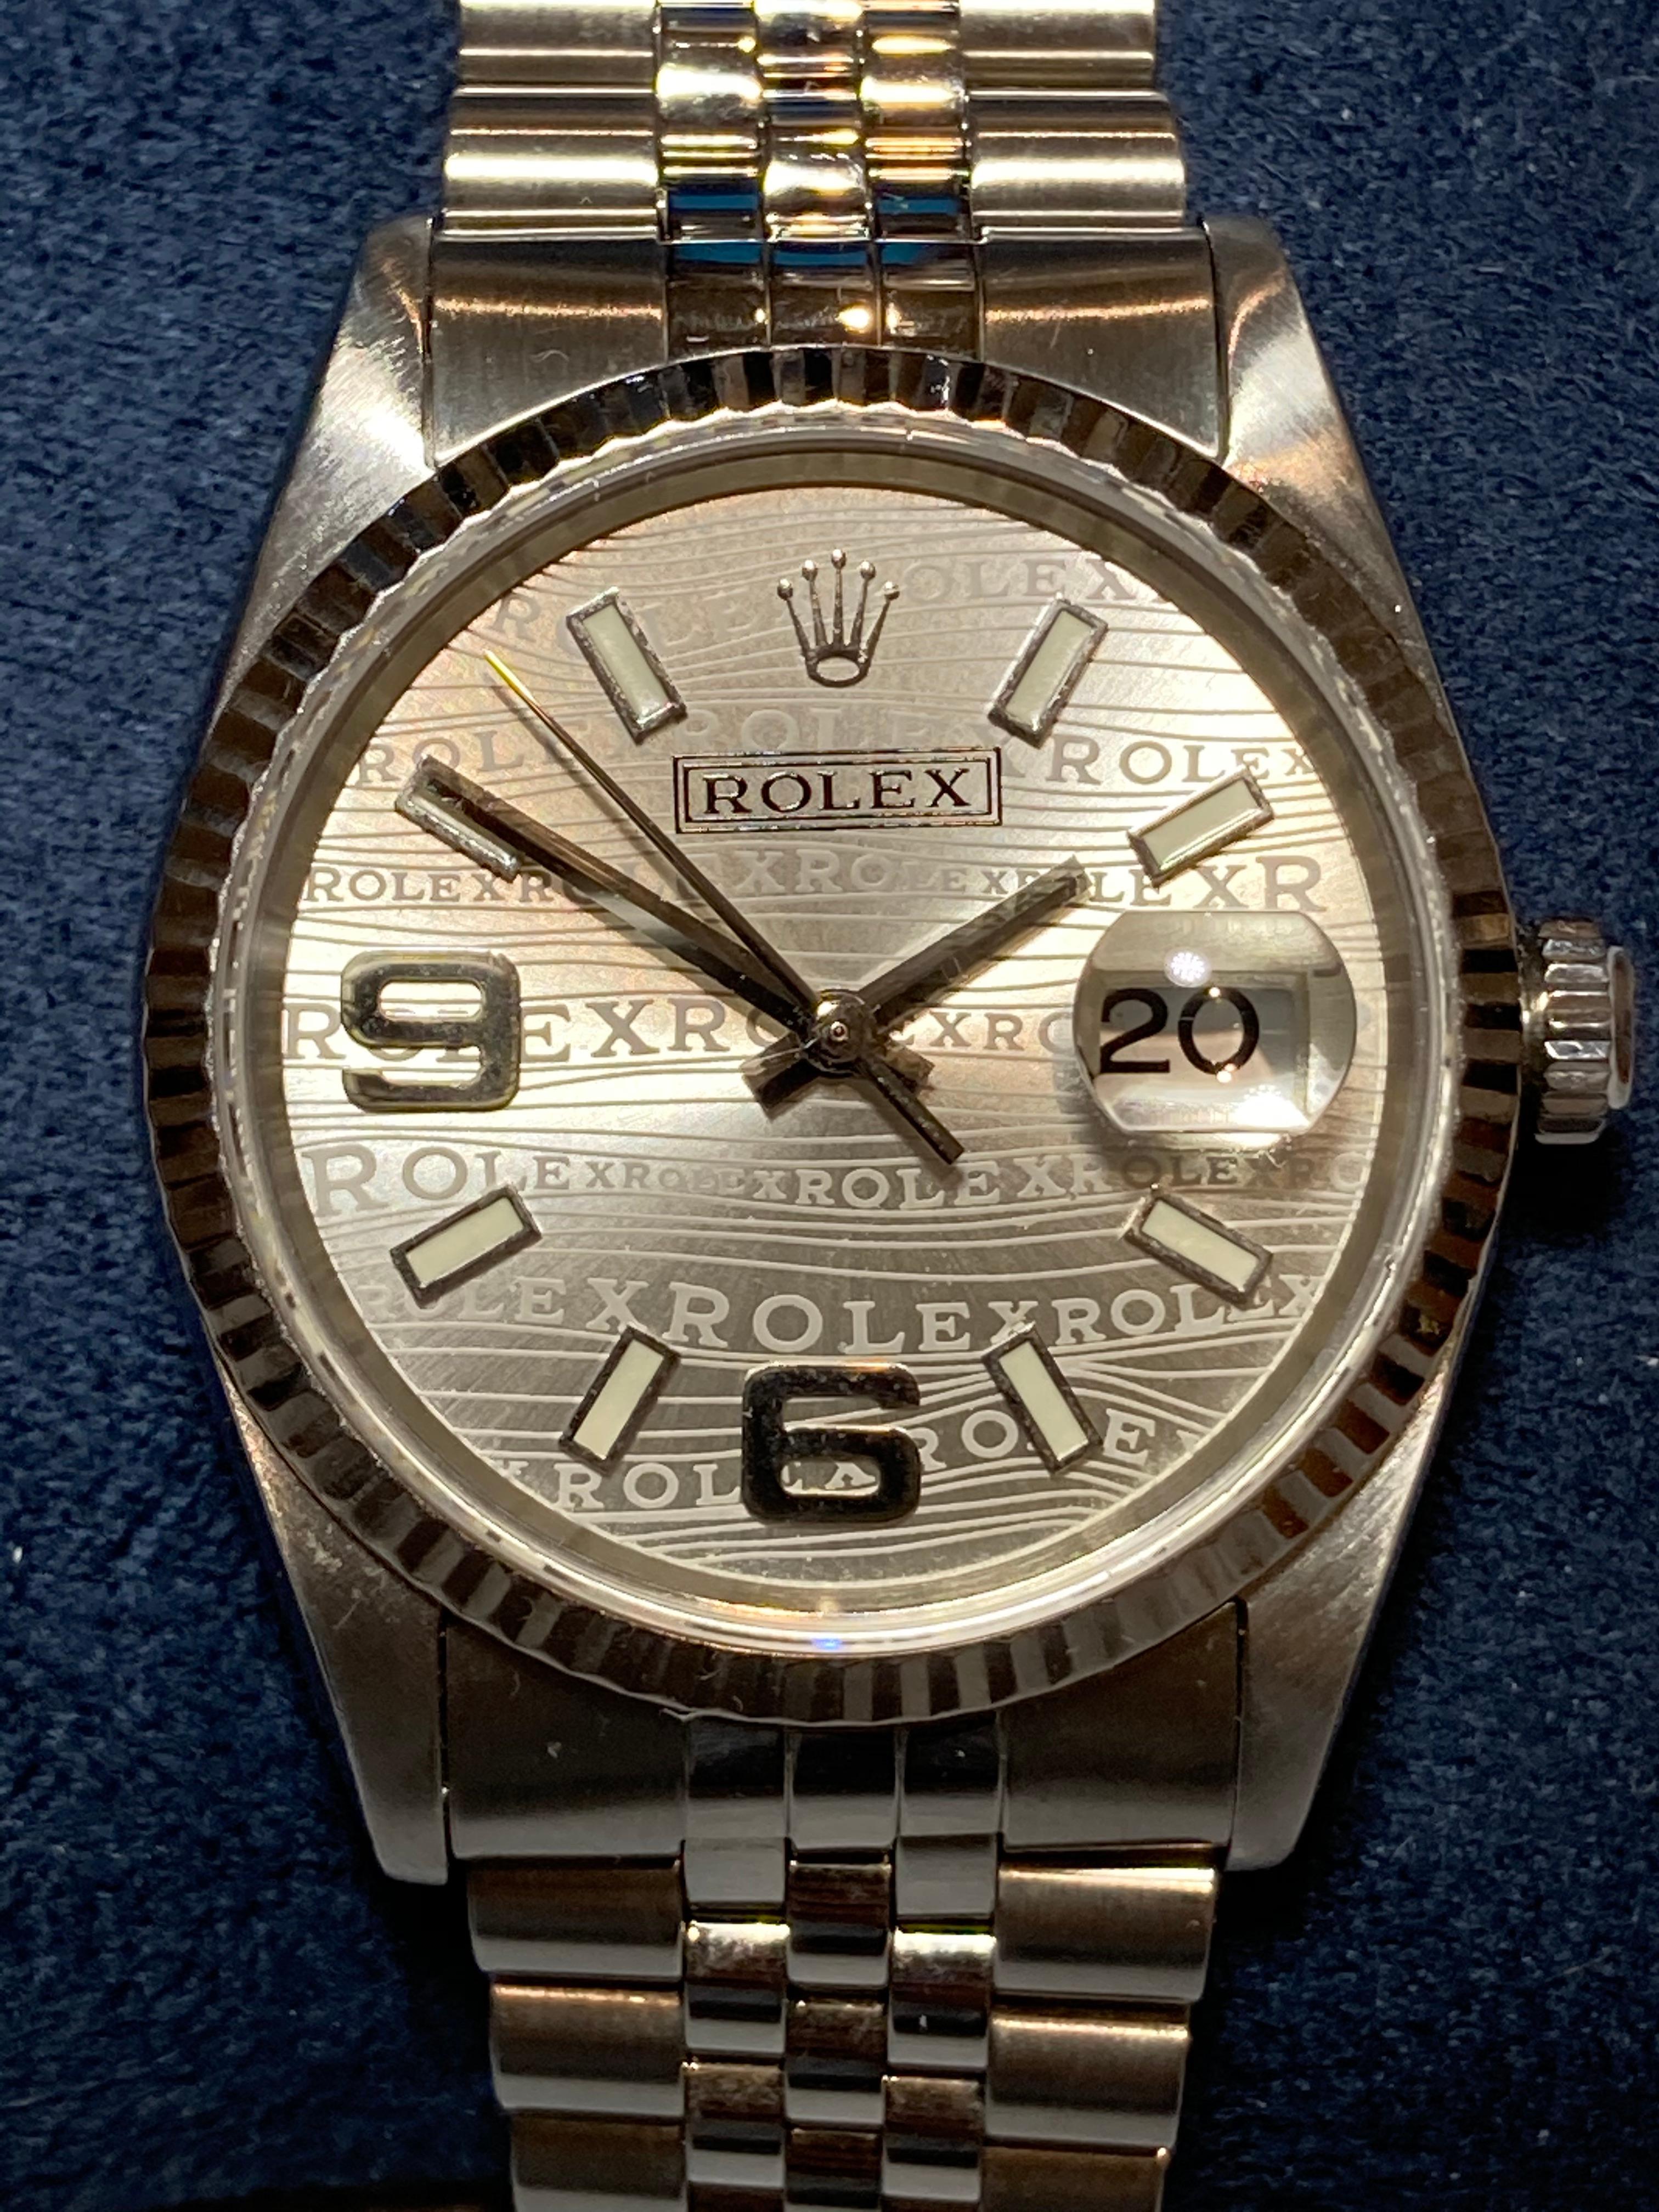 Rolex mens Datejust watch with jubilee band.